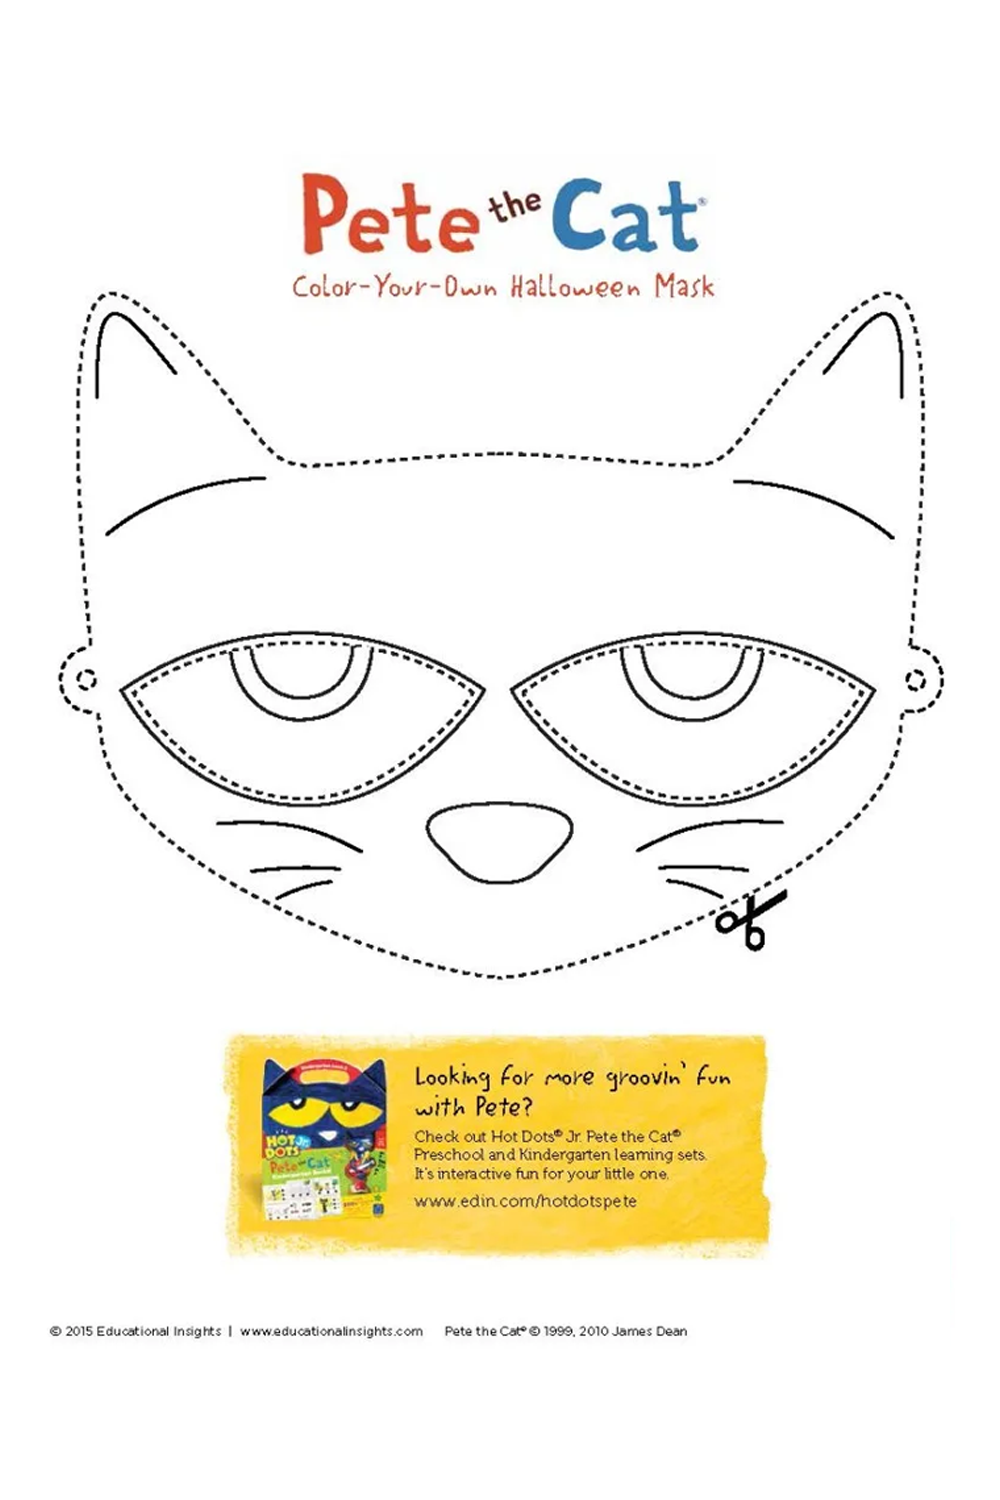 Pete the cat diy art activities and more